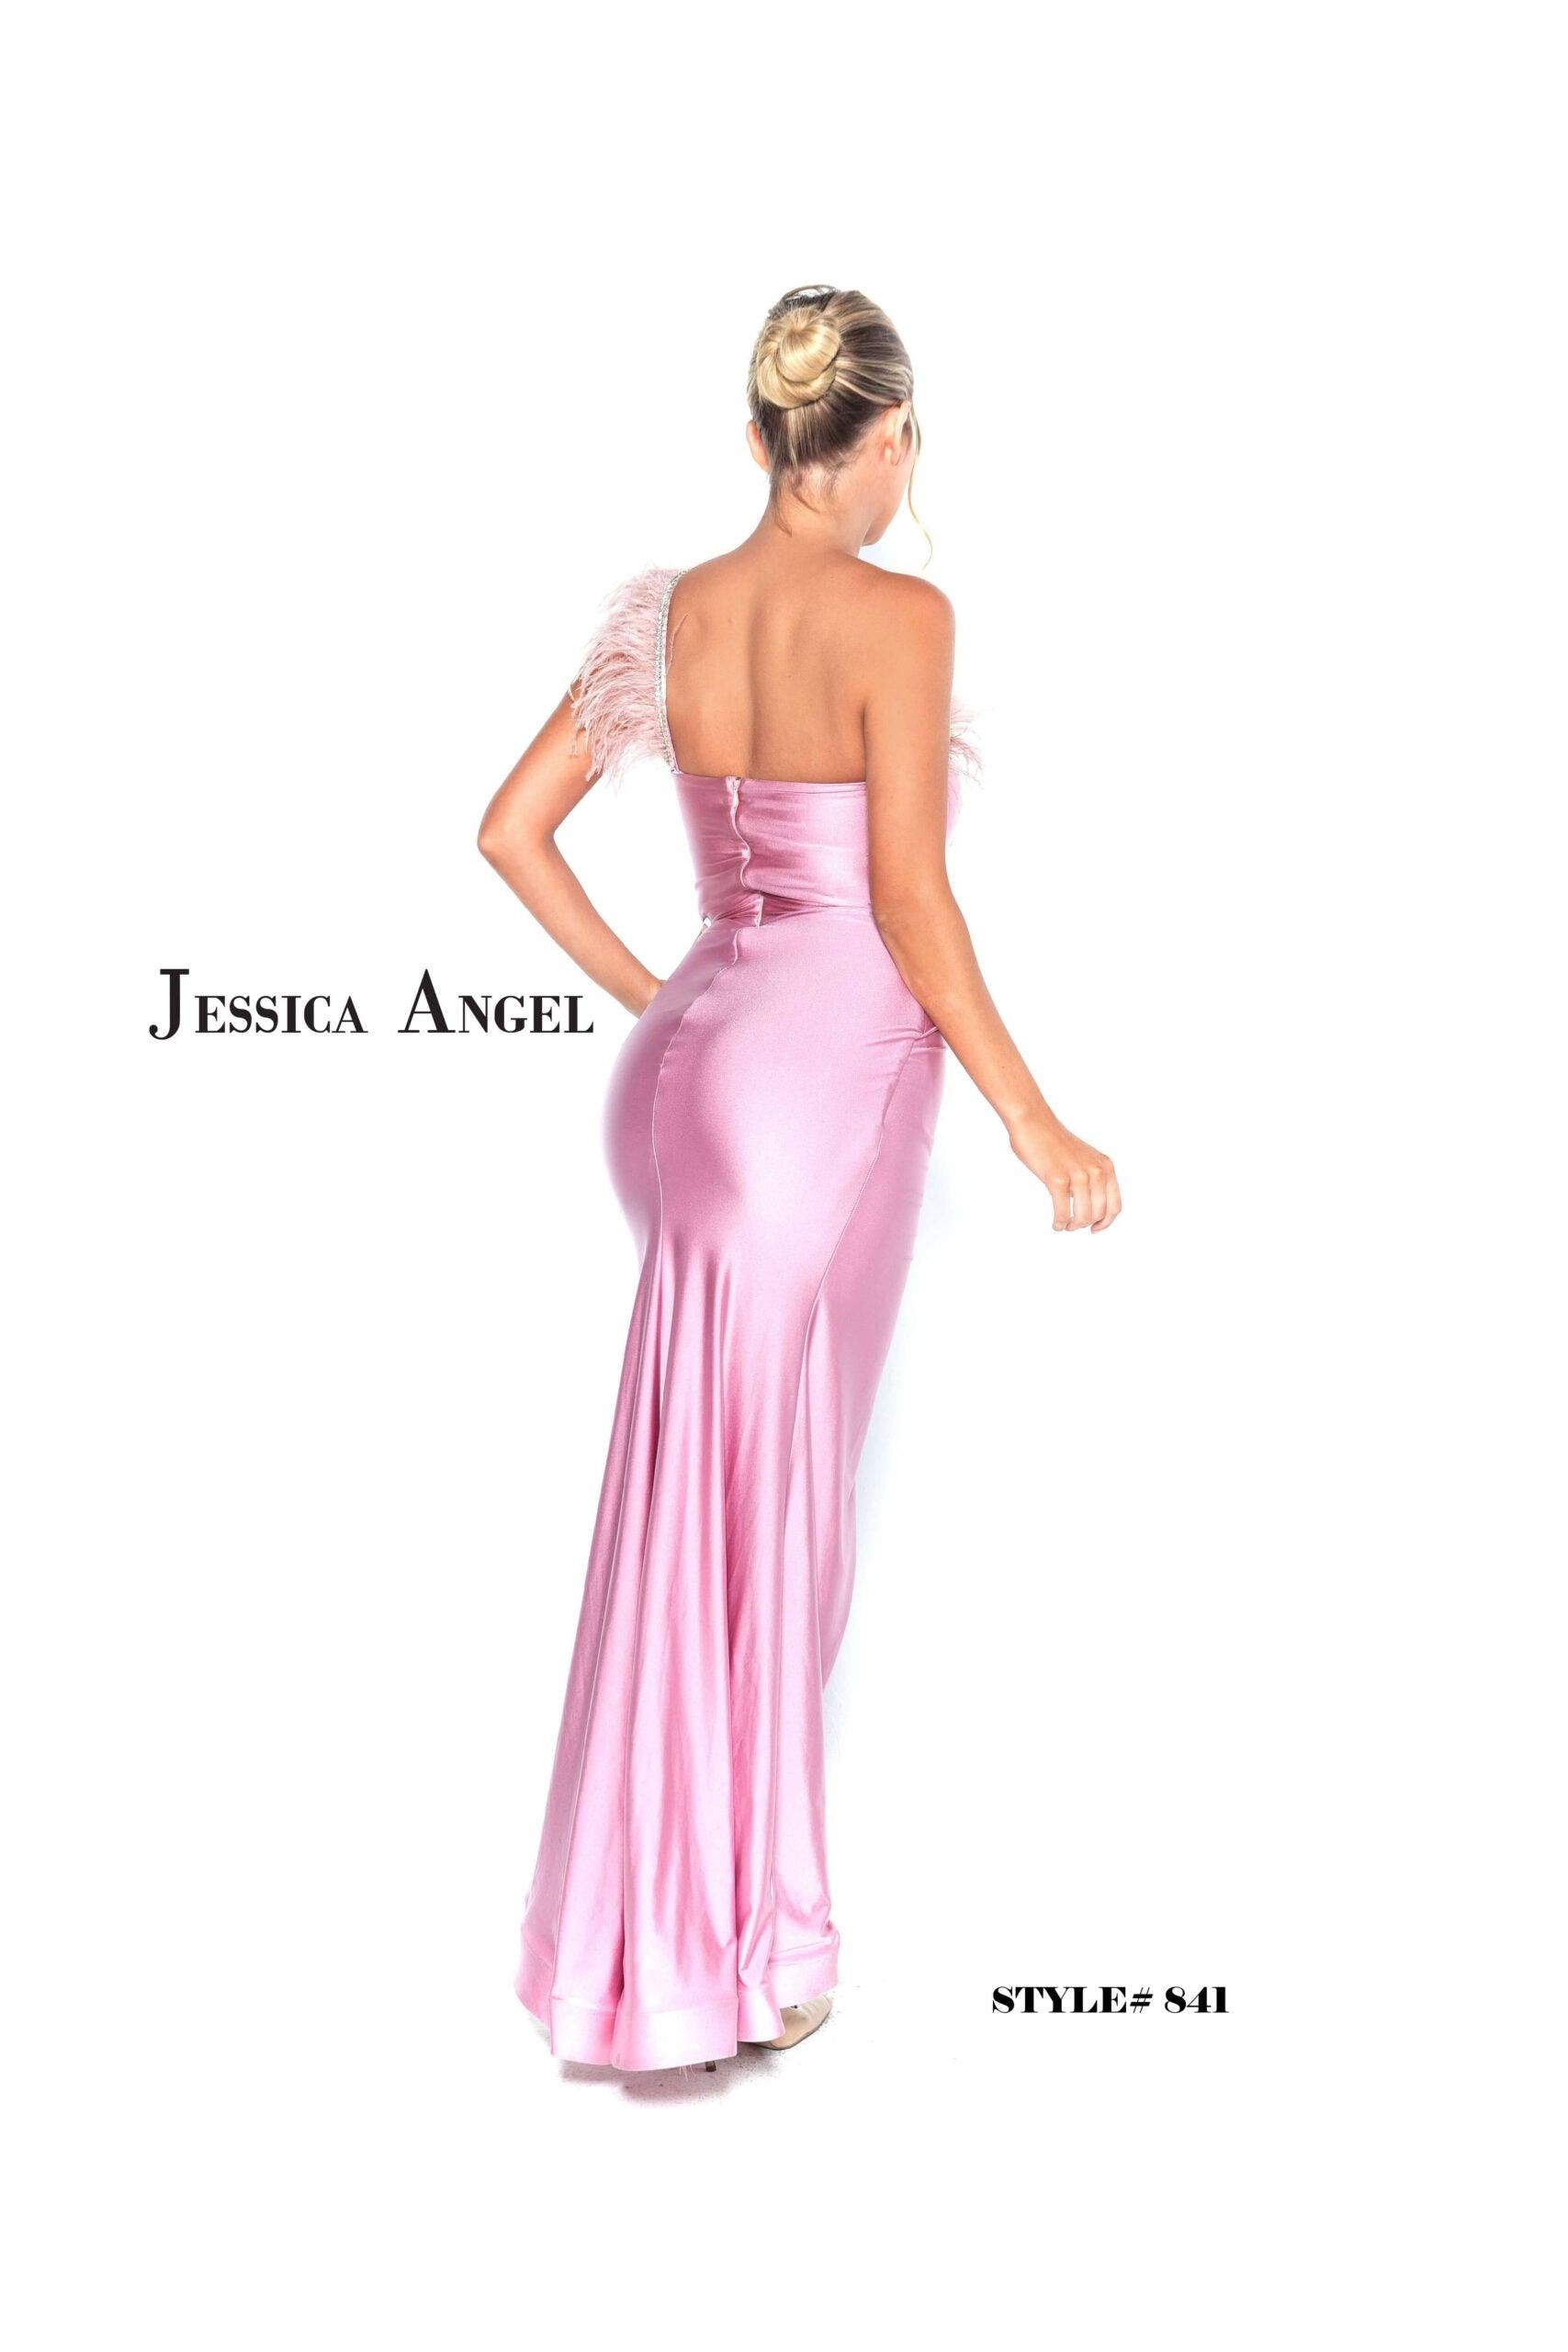 Jessica Angel One Shoulder Long Fitted Dress 841 - The Dress Outlet